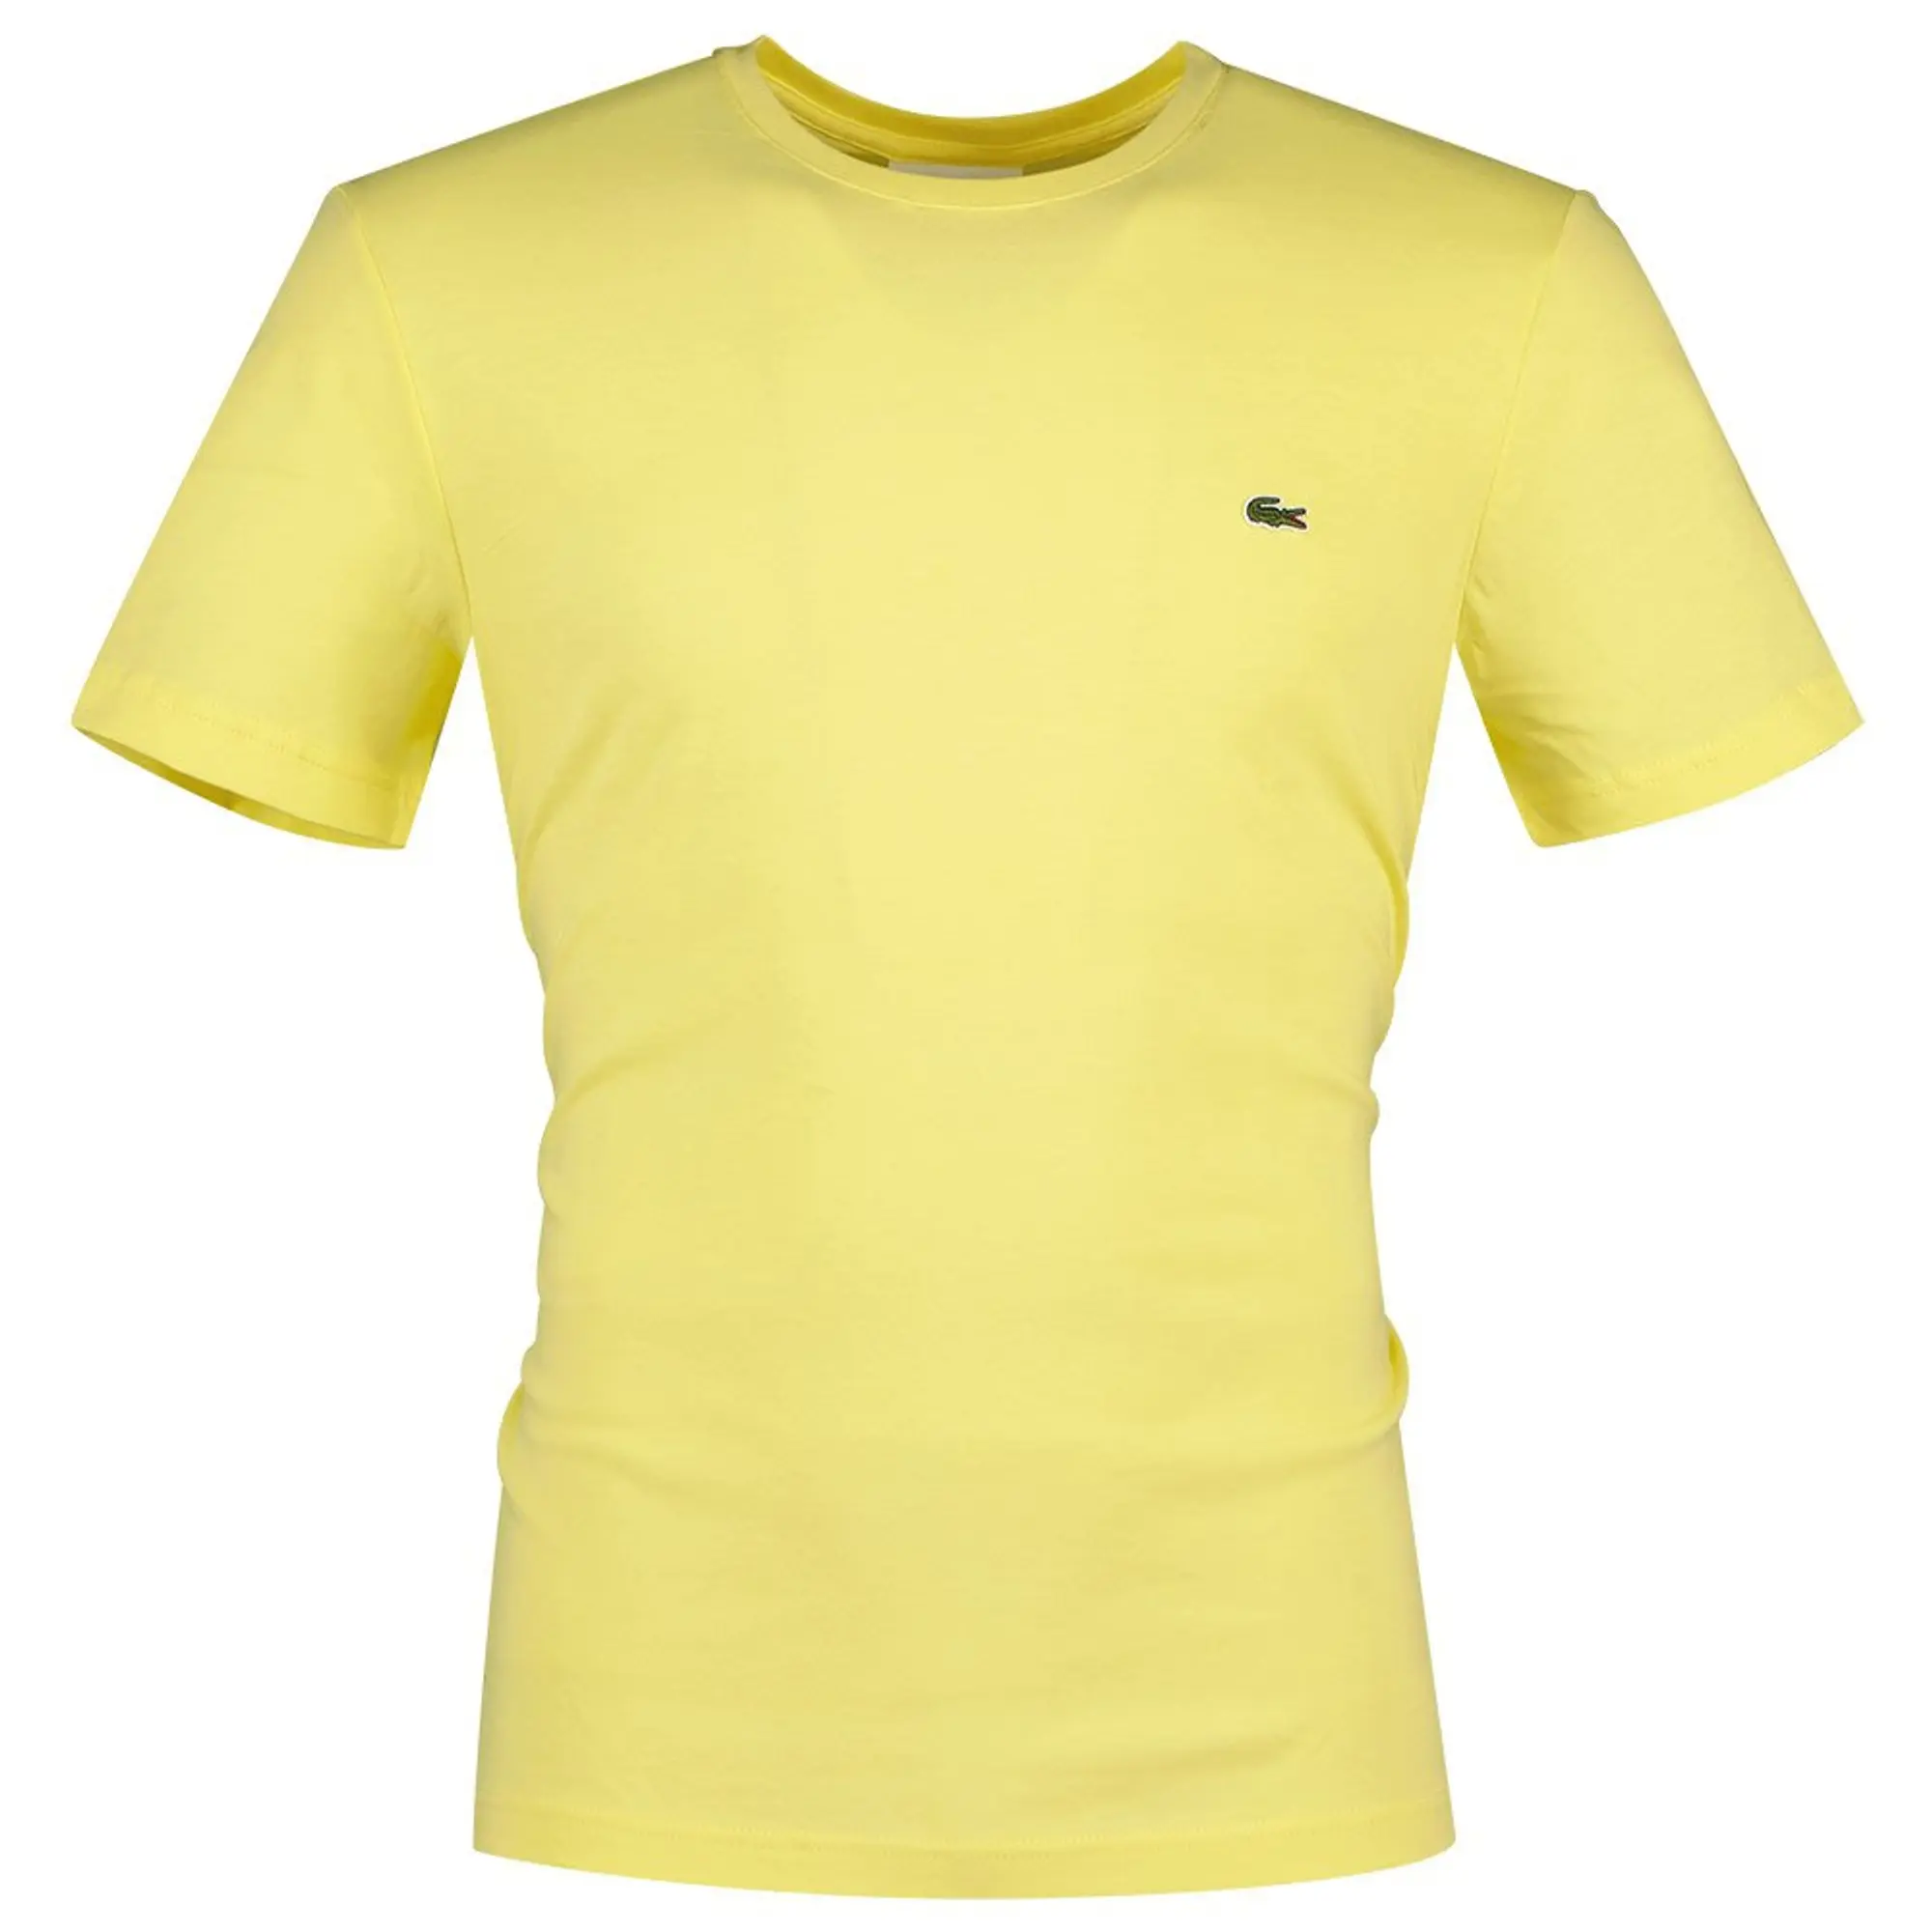 Lacoste Th2038 Short Sleeve T-shirt  - Yellow